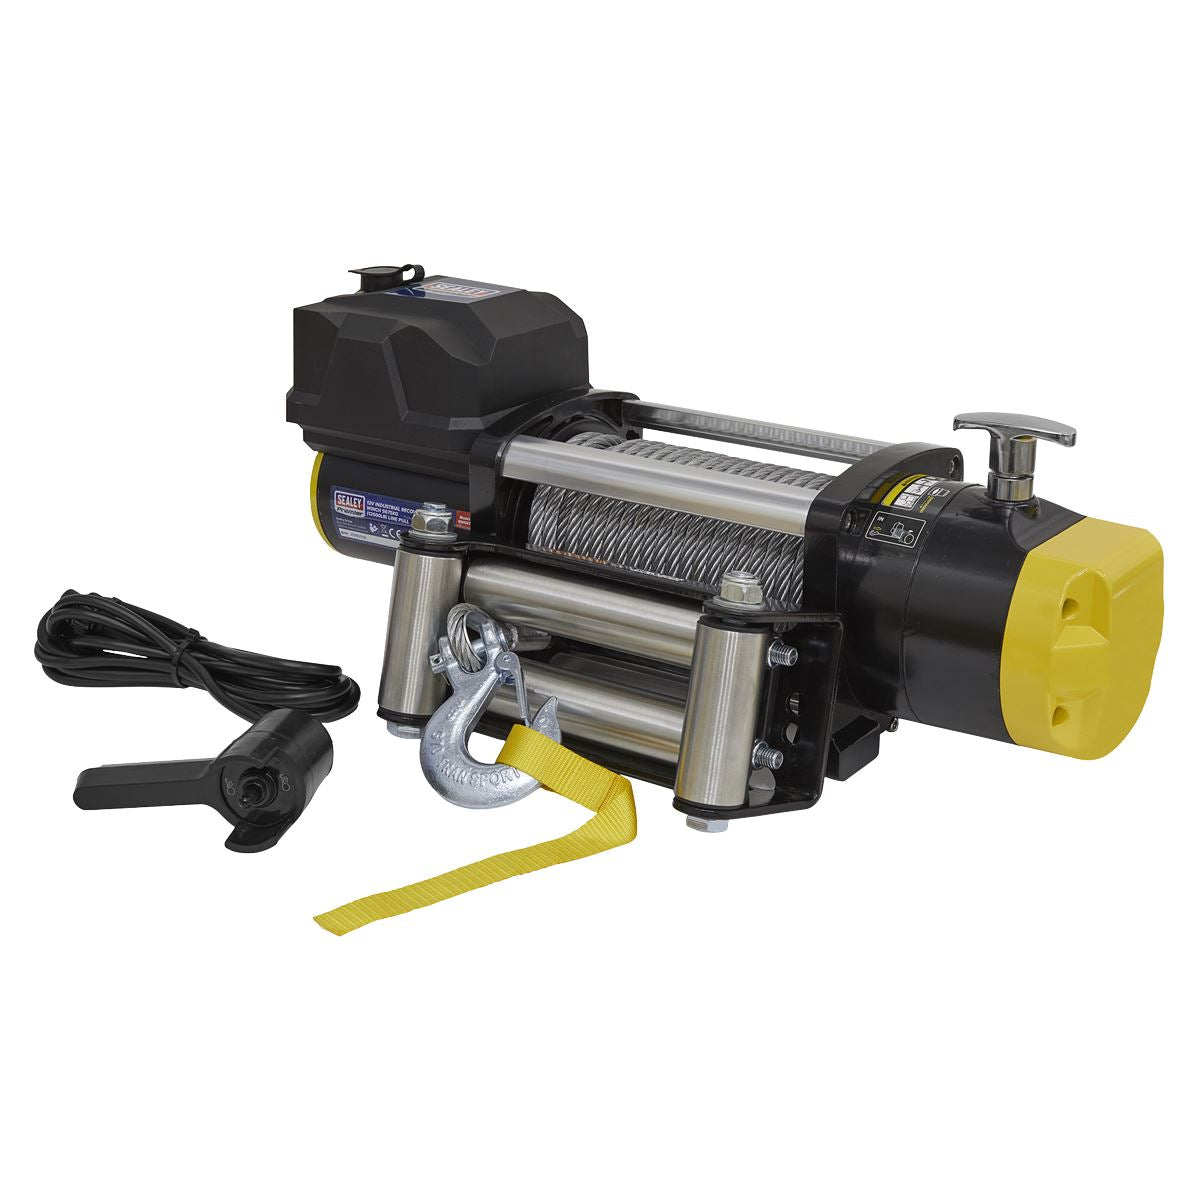 Sealey Premier Recovery Winch 5675kg (12500lb) Line Pull 12V Industrial